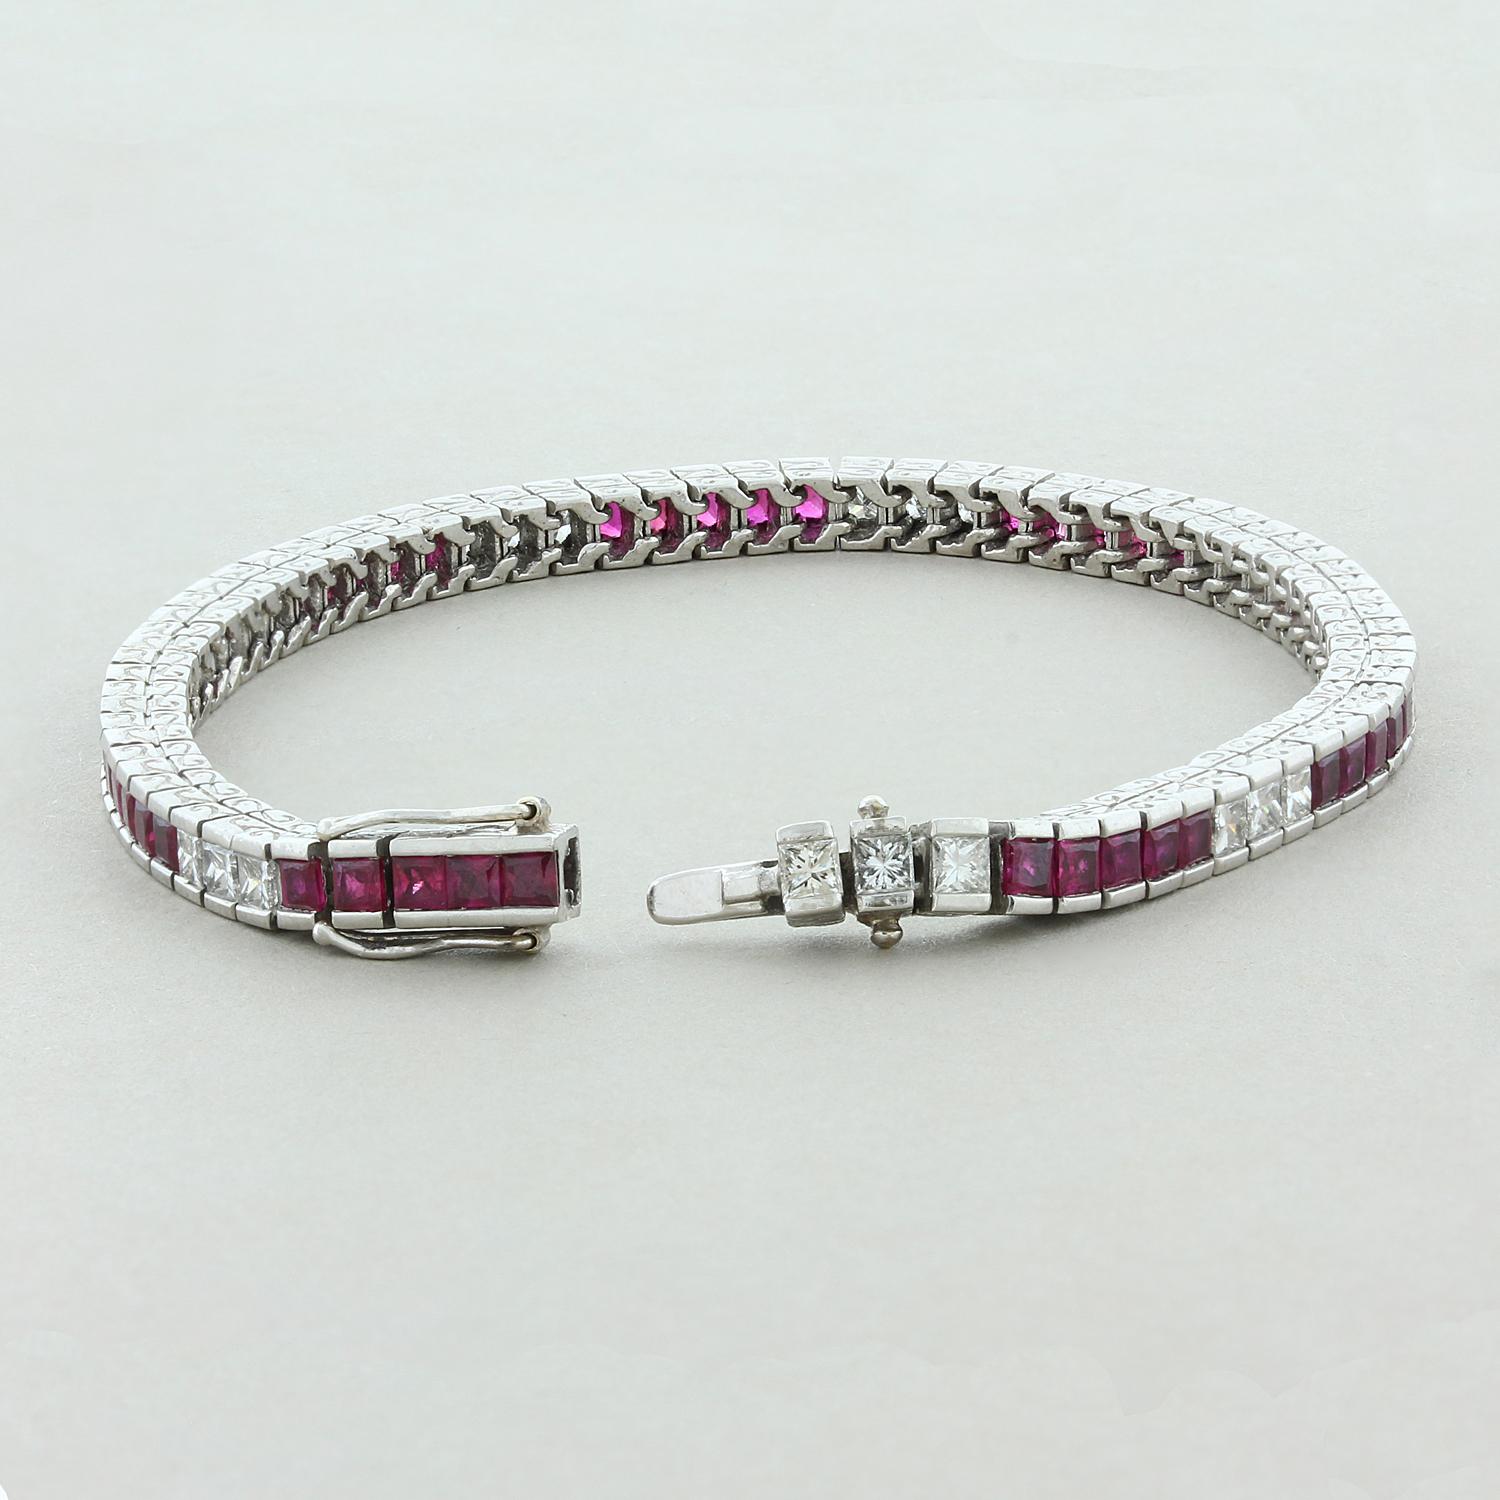 A delicately smooth and flexible bracelet from the end of the Art Deco era, this piece featuring 5.00 carats of princess cut red rubies alternating with approximately 1.50 carats of princess cut diamonds. This timeless bracelet is in a platinum